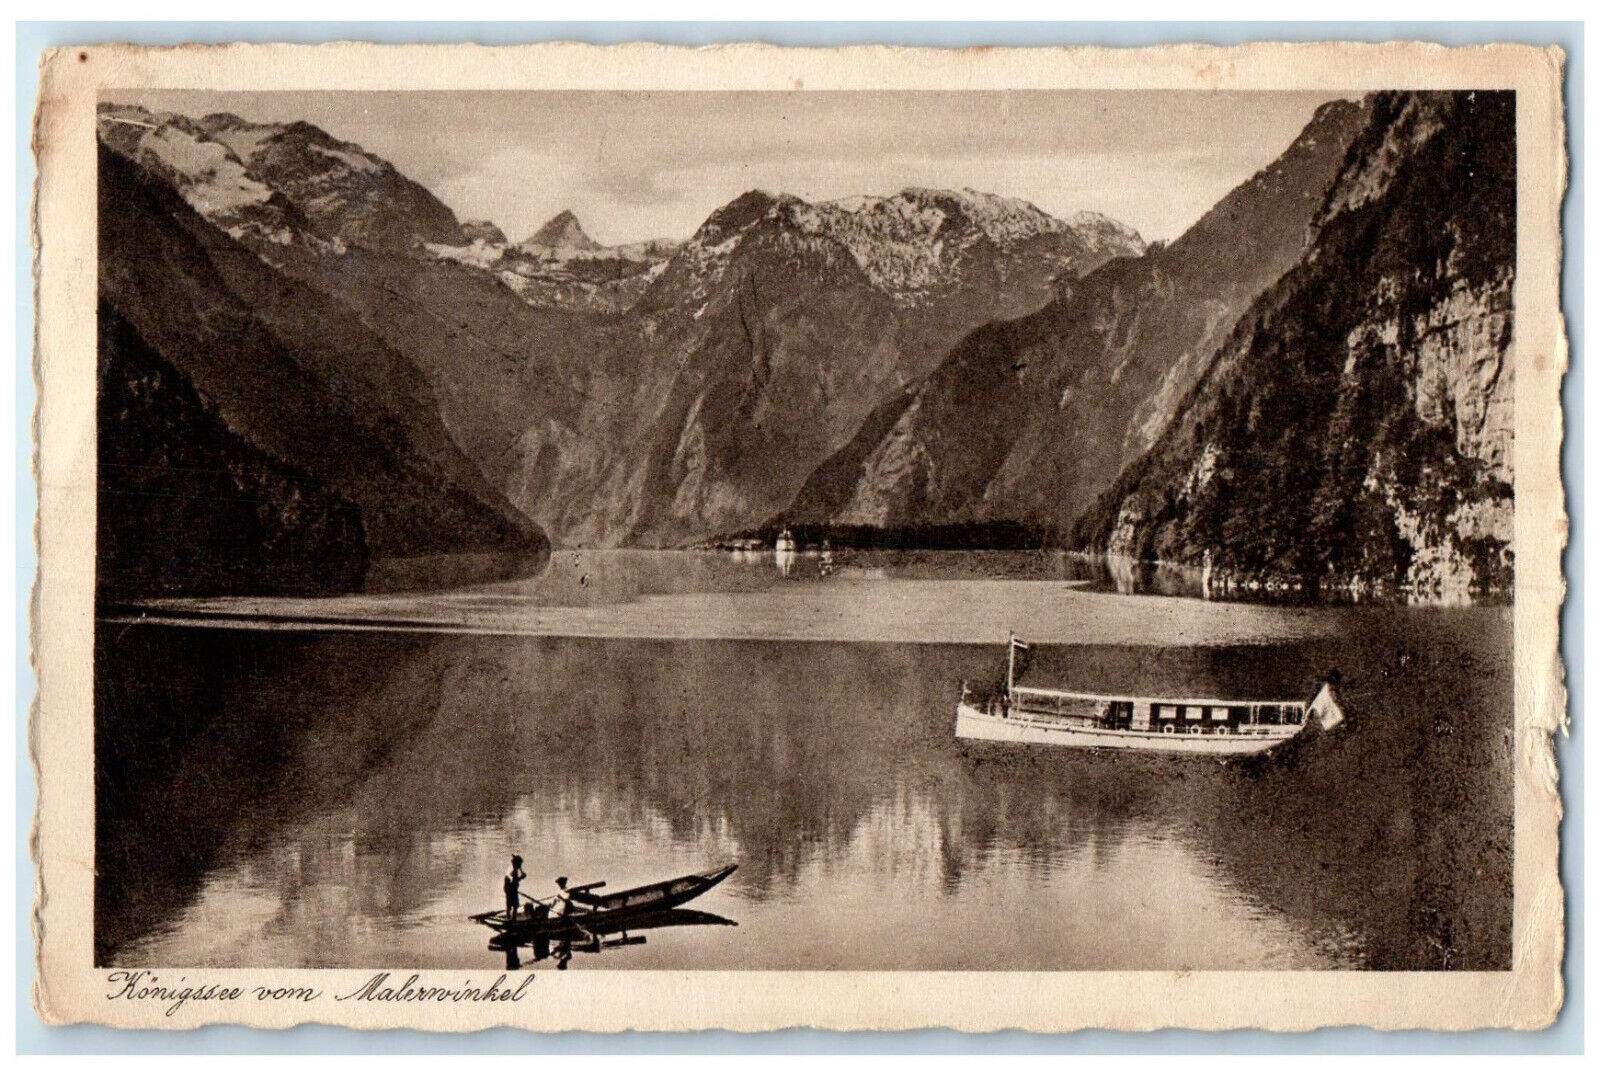 c1930's Boating at Konigssee from Malerwinkel Germany Posted Vintage Postcard